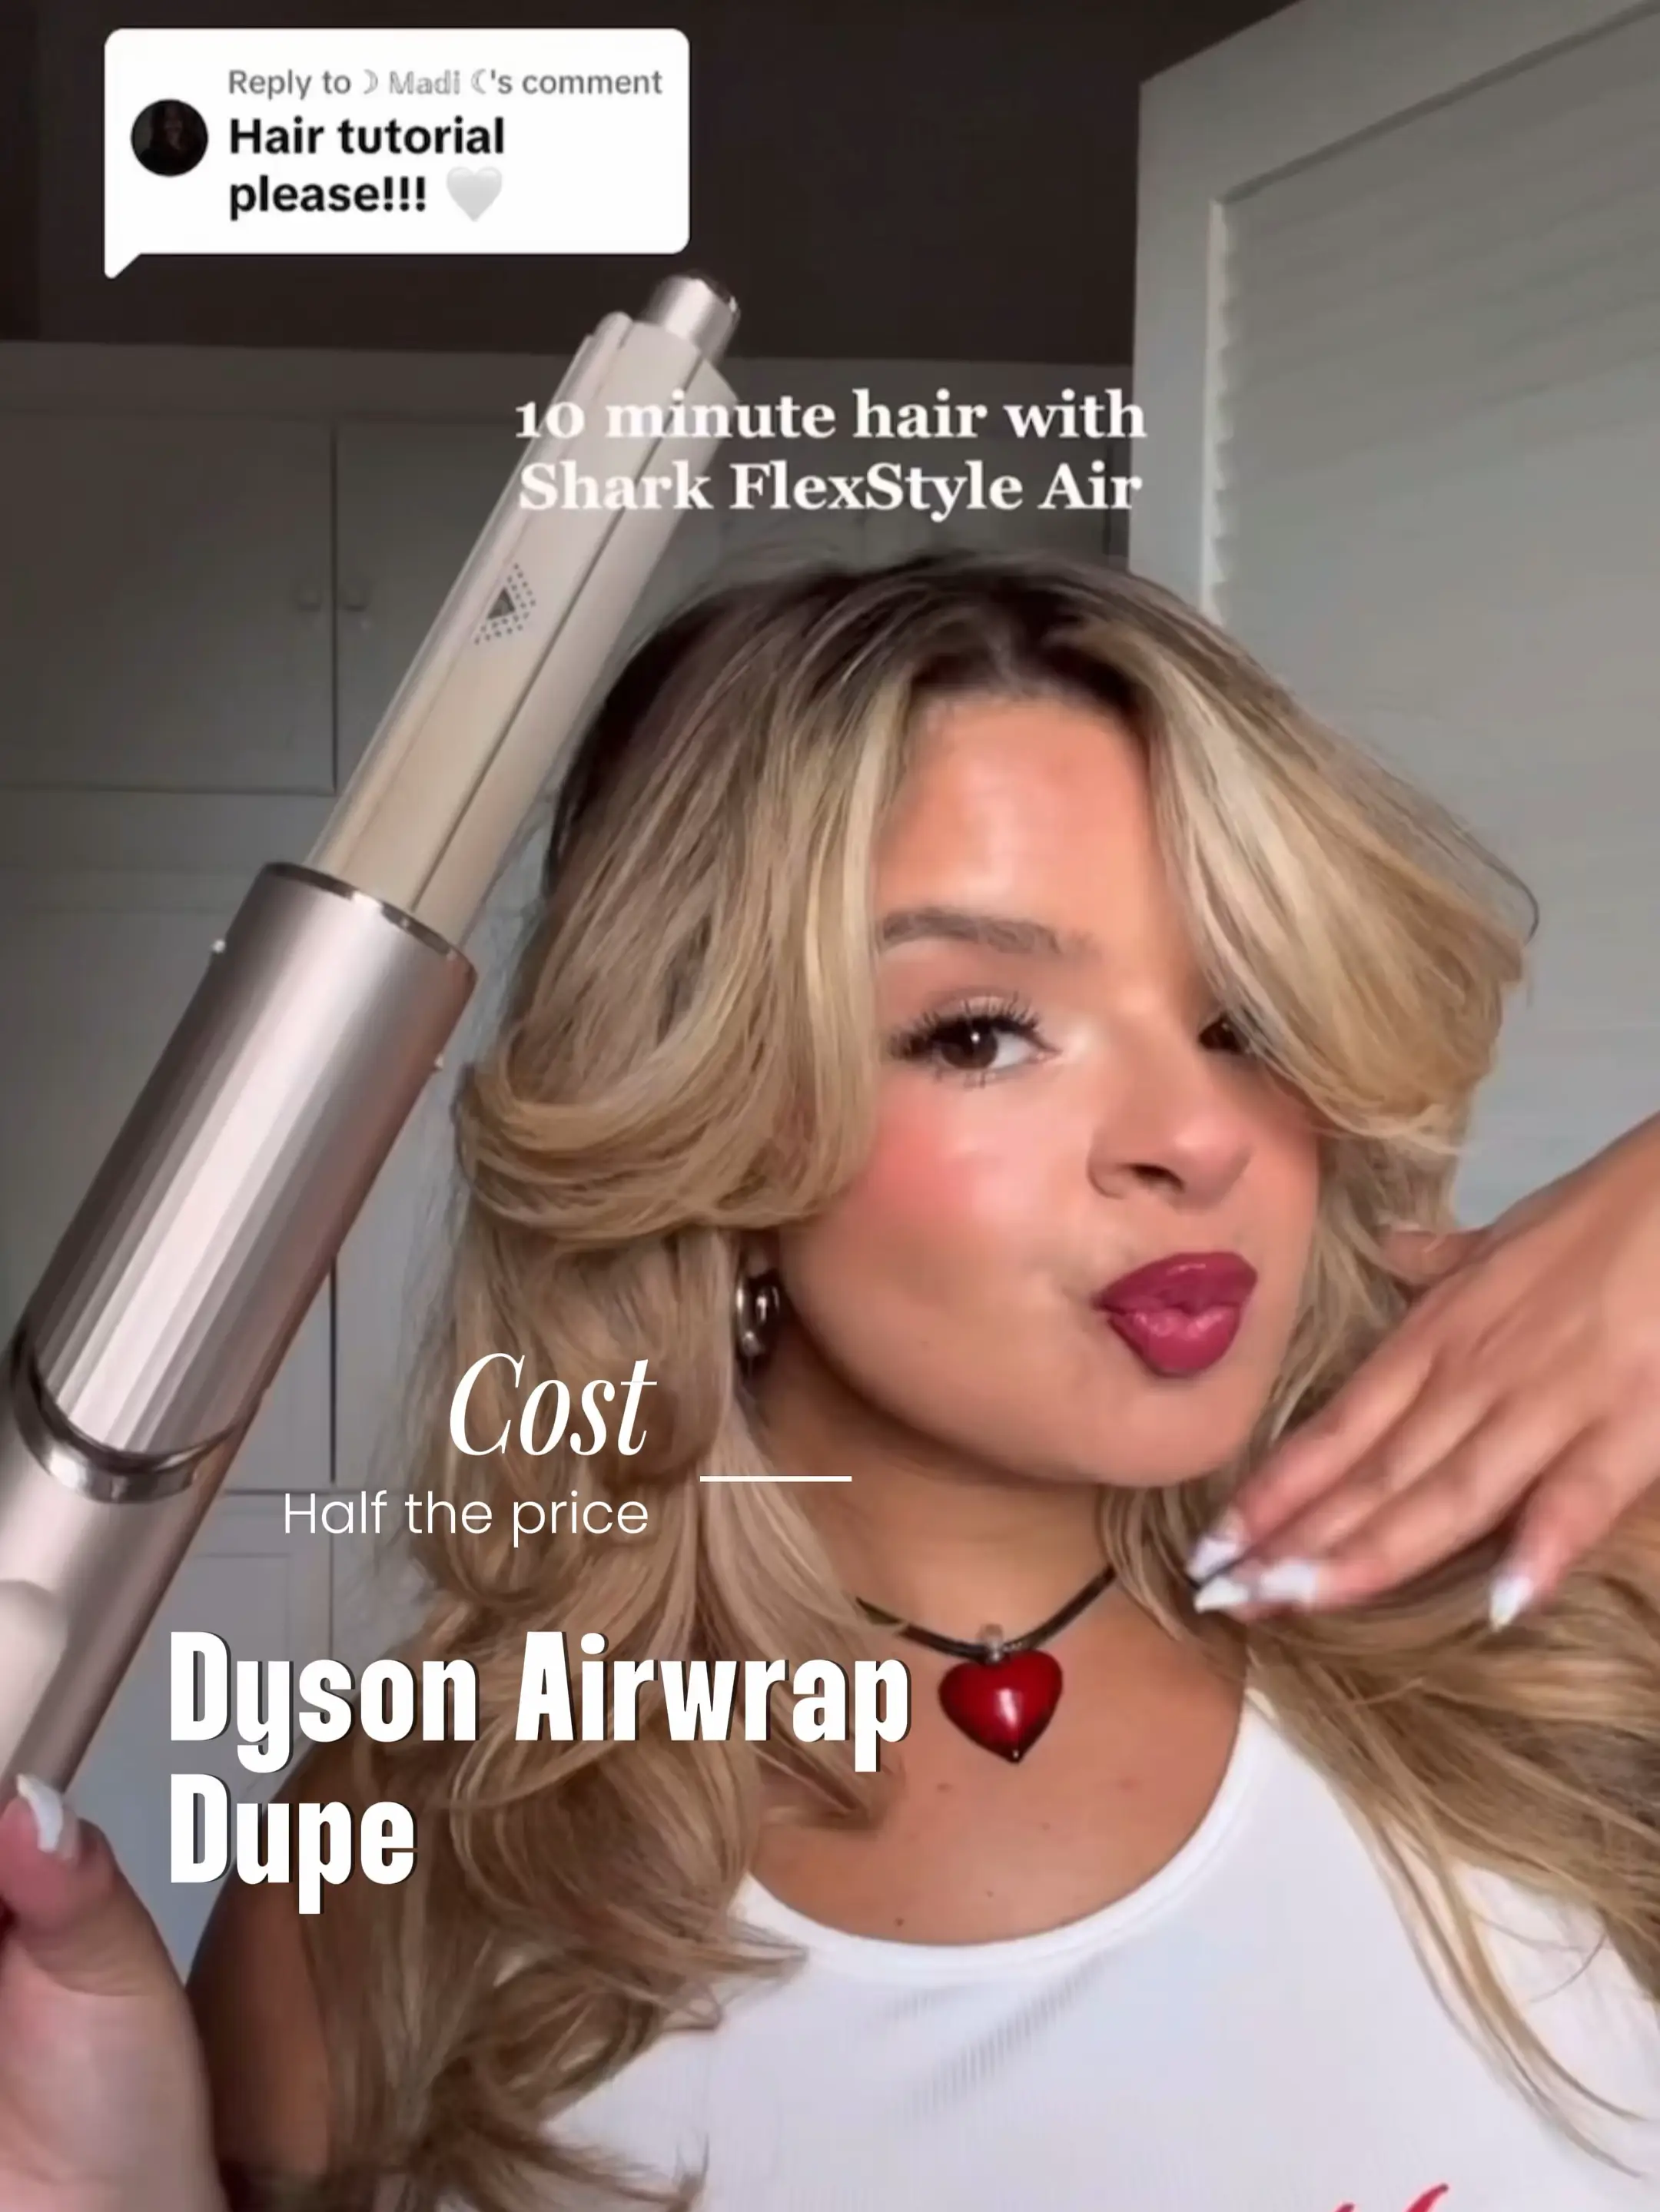 Shark FlexStyle review: the Dyson Airwrap dupe that costs a lot